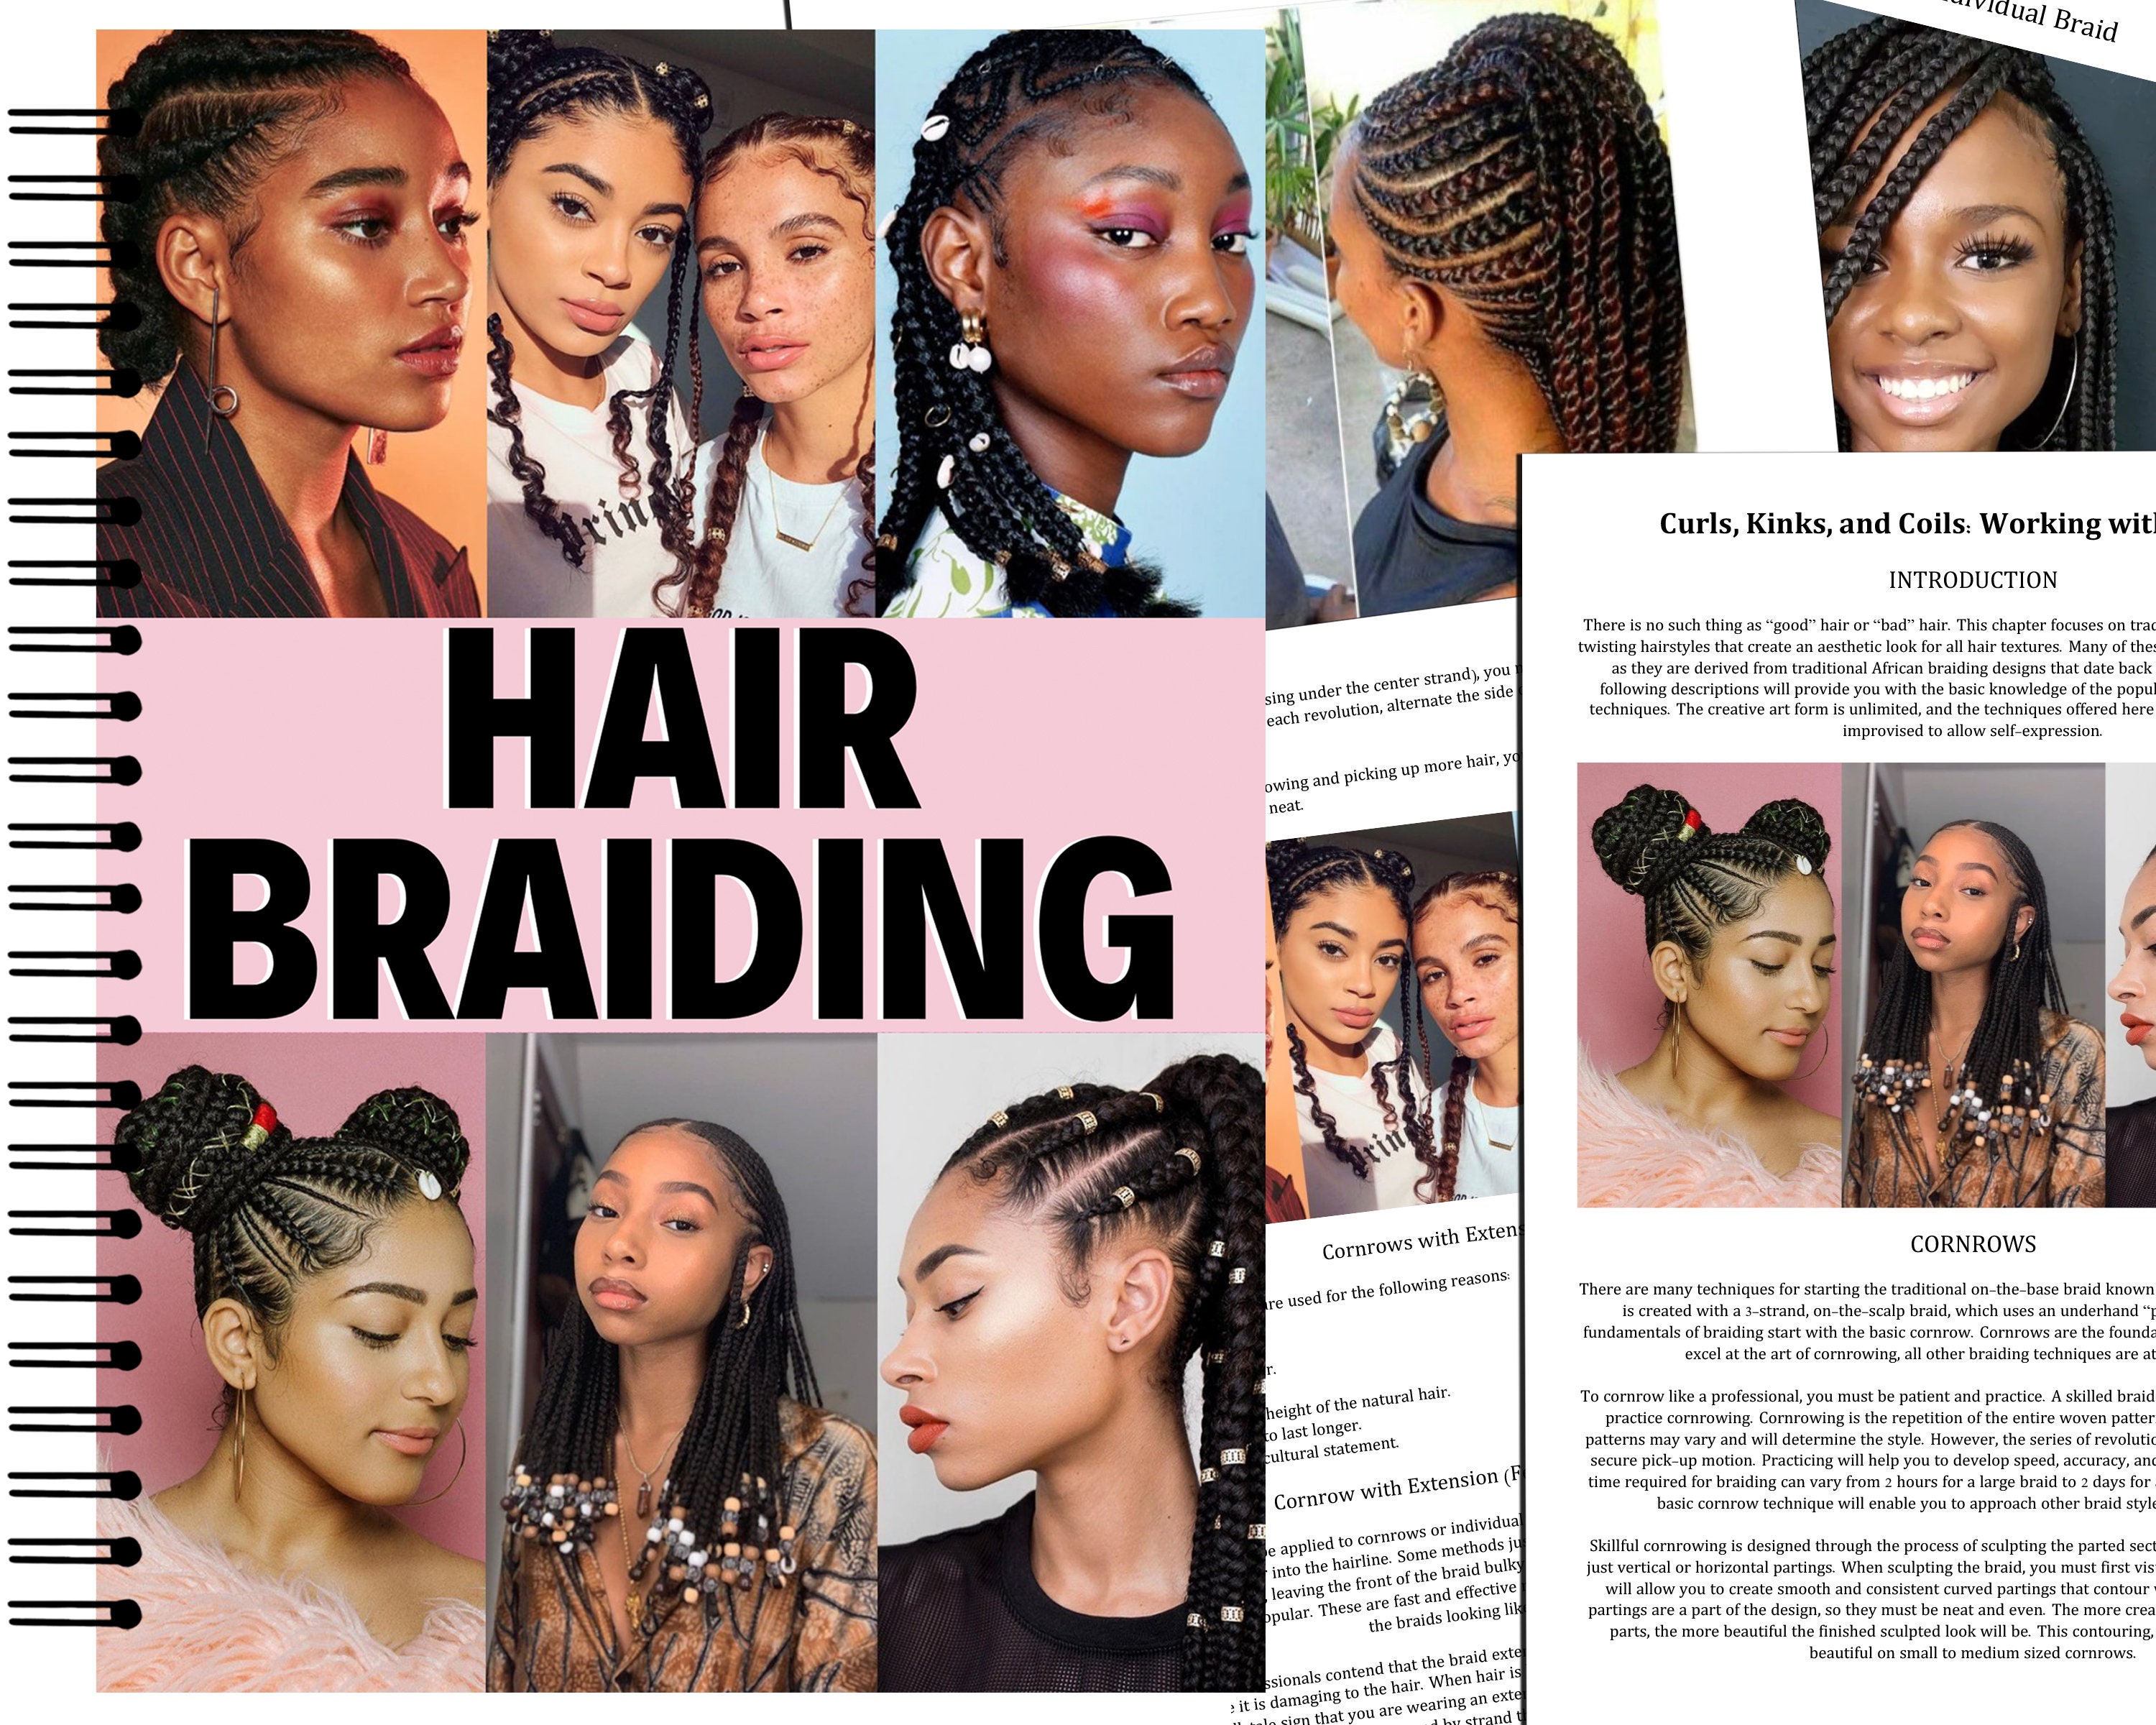 Hair Braiding Training Manual, Afro Braids, Cornrows, Locs, Guide, PDF  Ebook, Student, Tutor, Learn, Teach, Instant Download and Editable